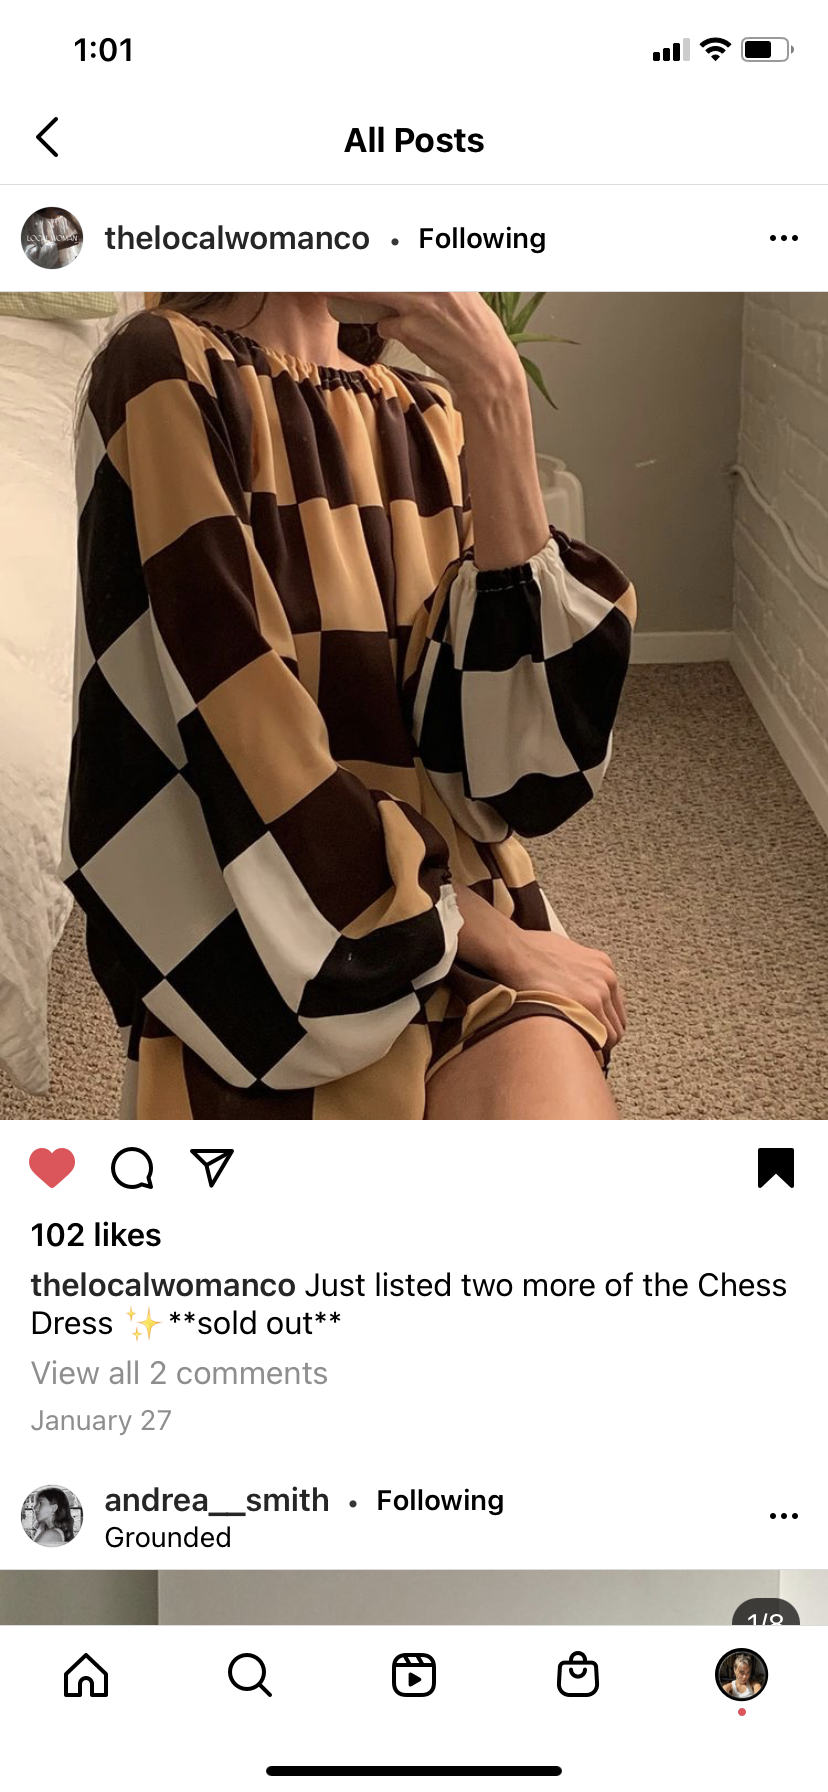 chess dress by @thelocalwomanco